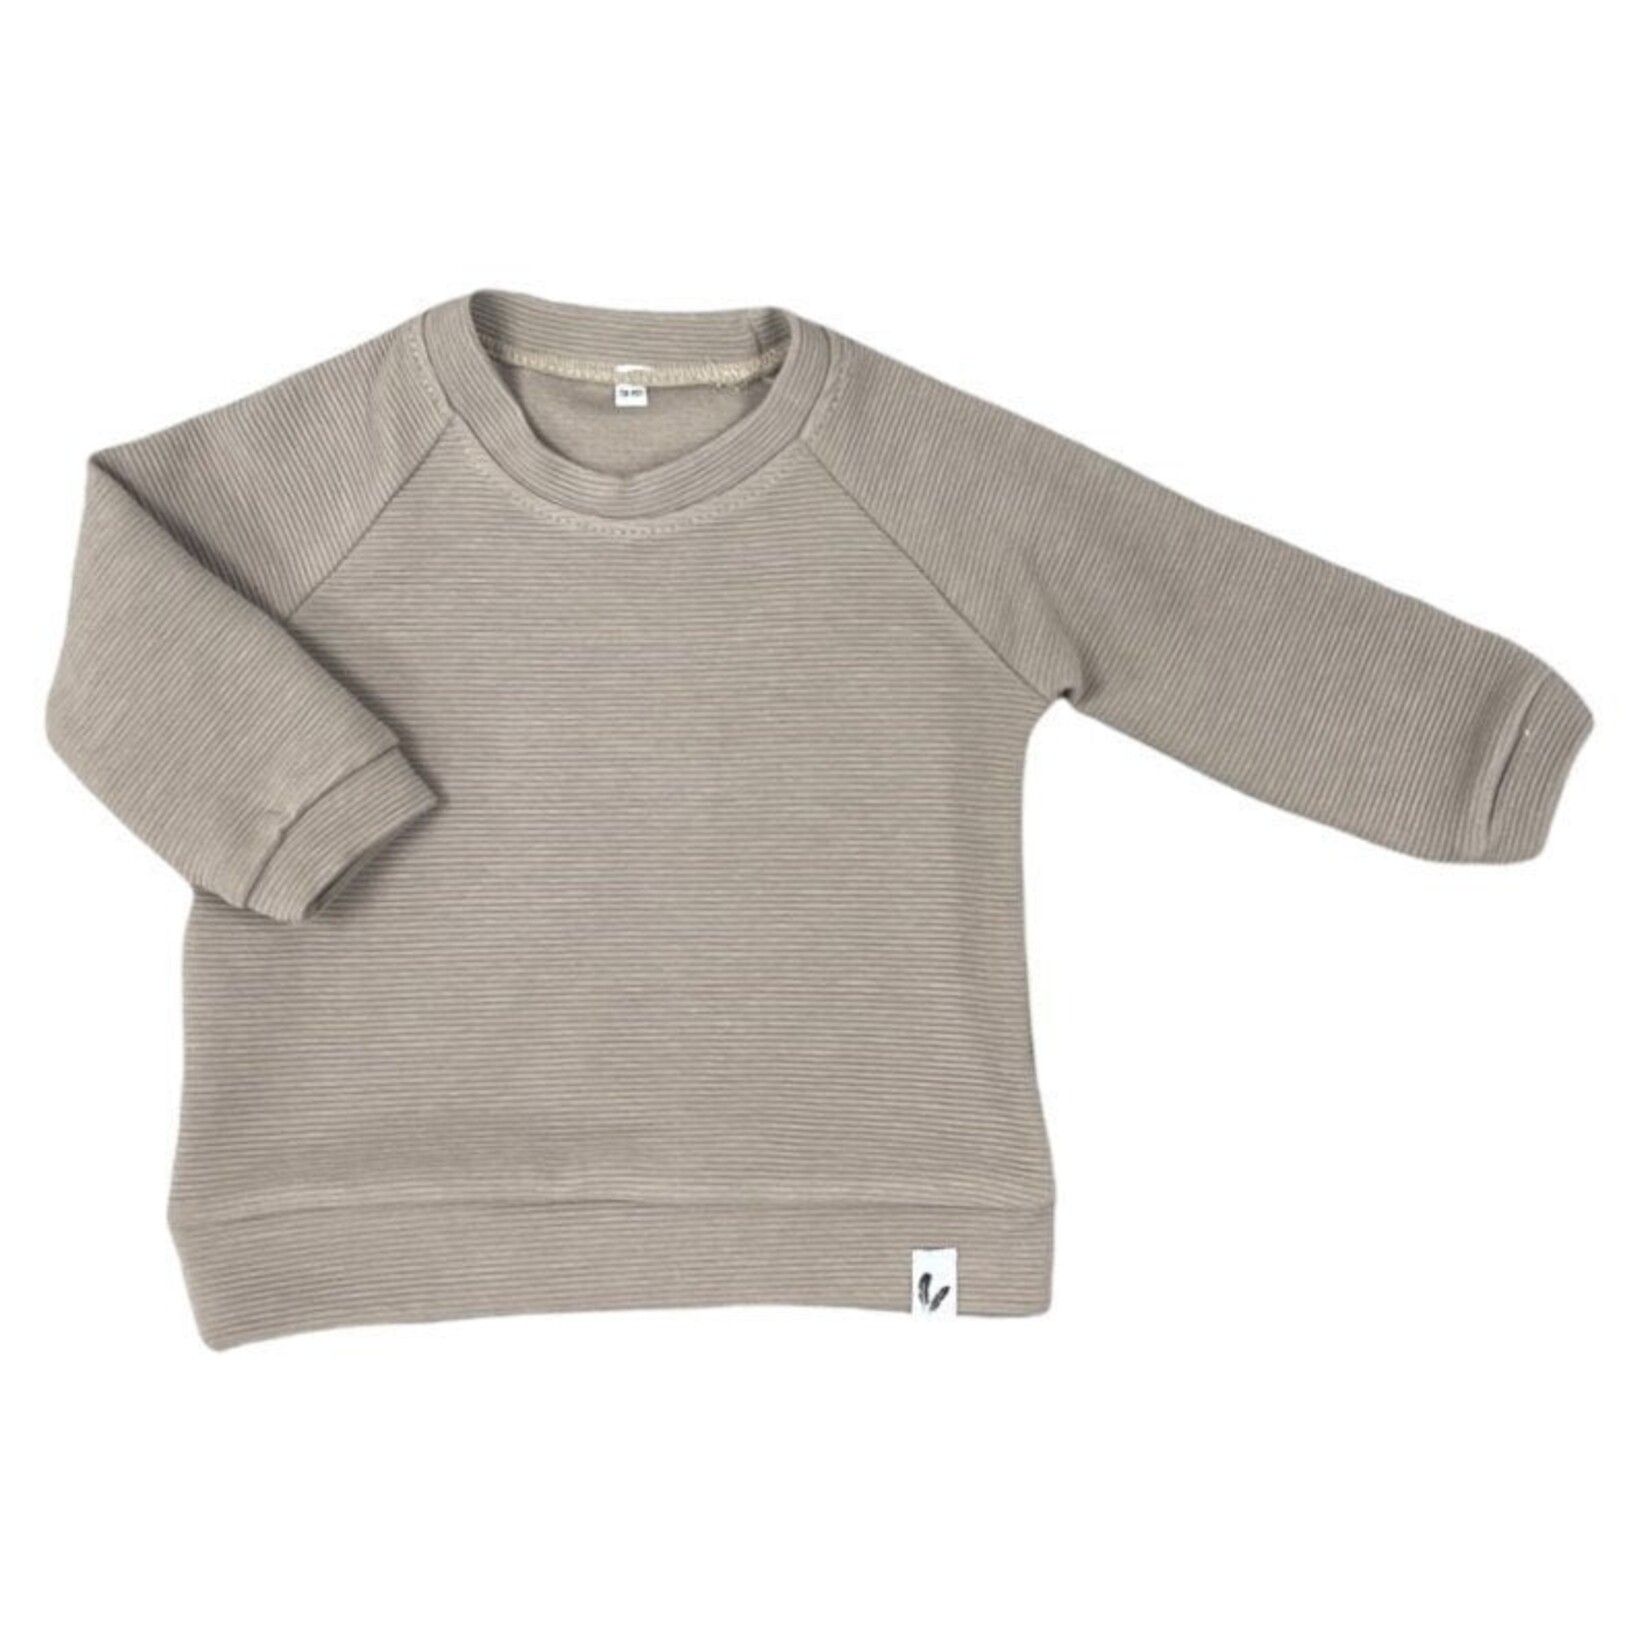 Feathers® Sweater - Rib Taupe